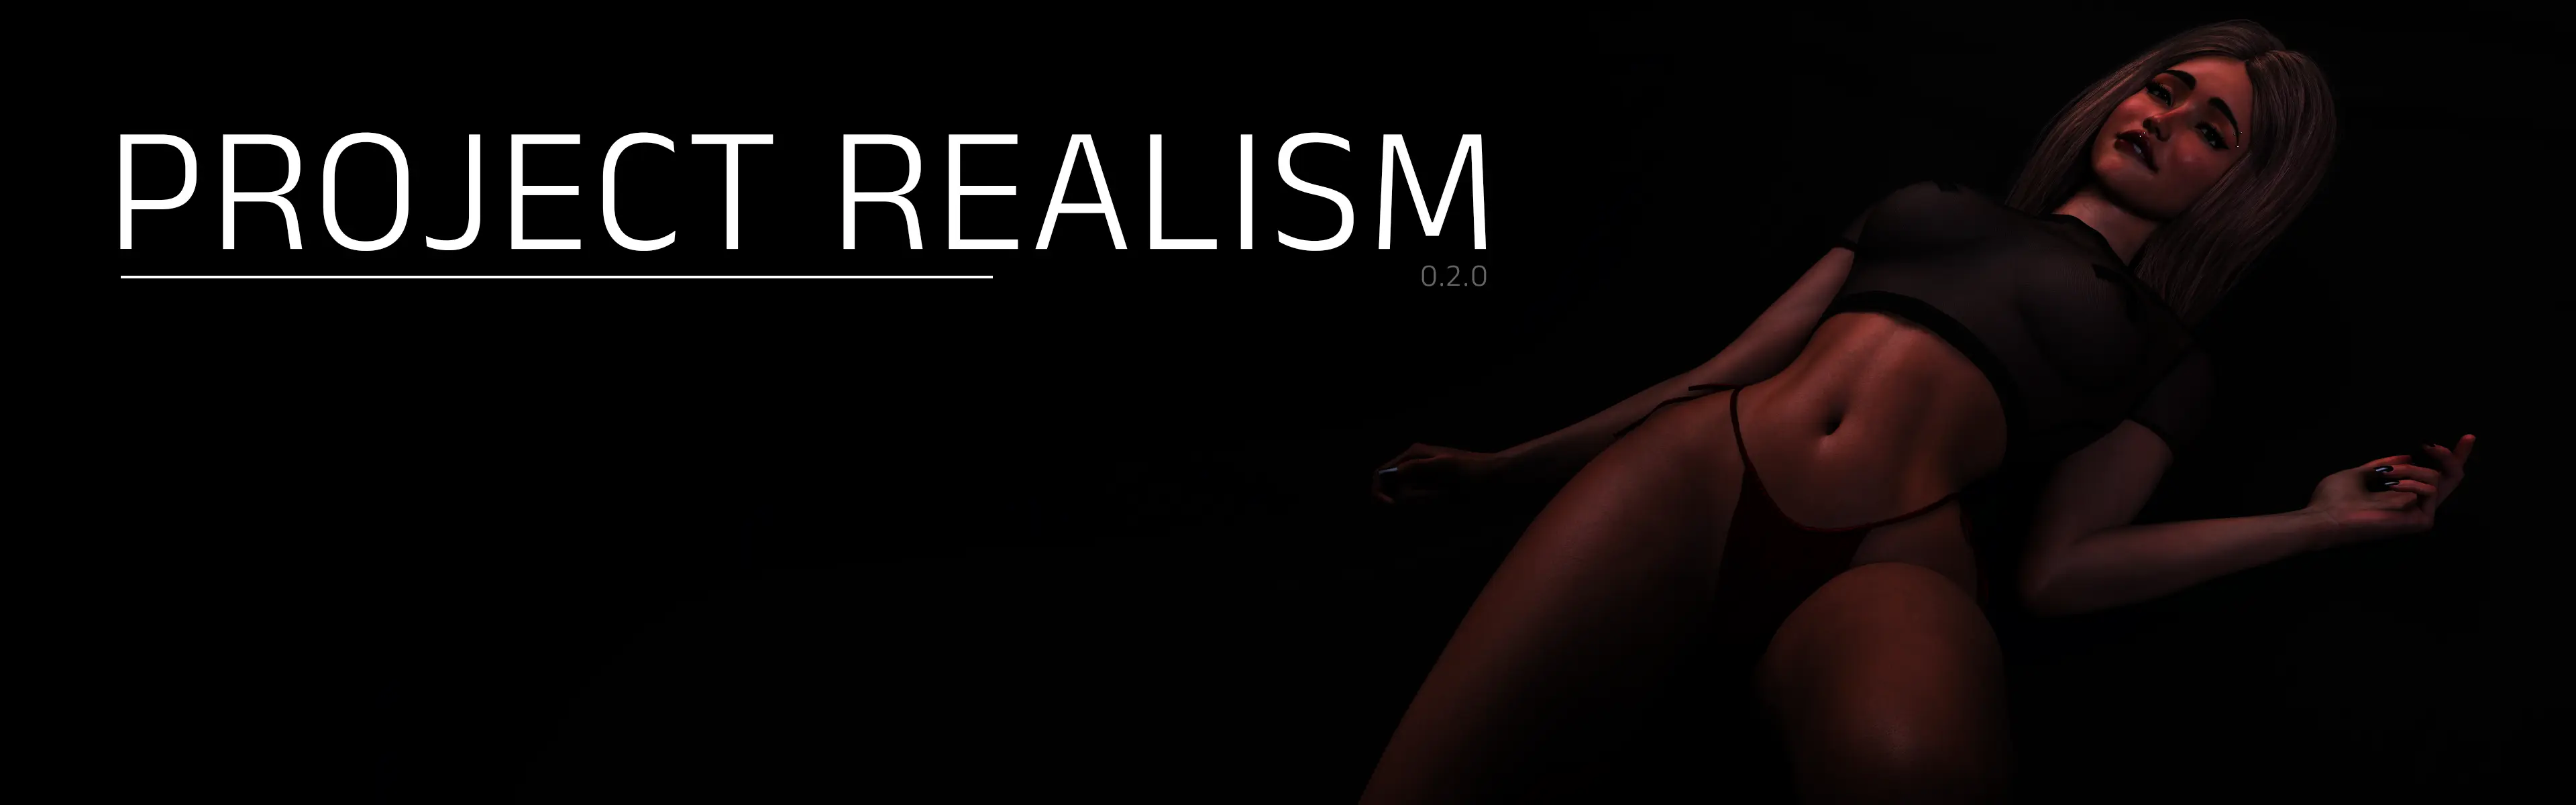 Project Realism main image